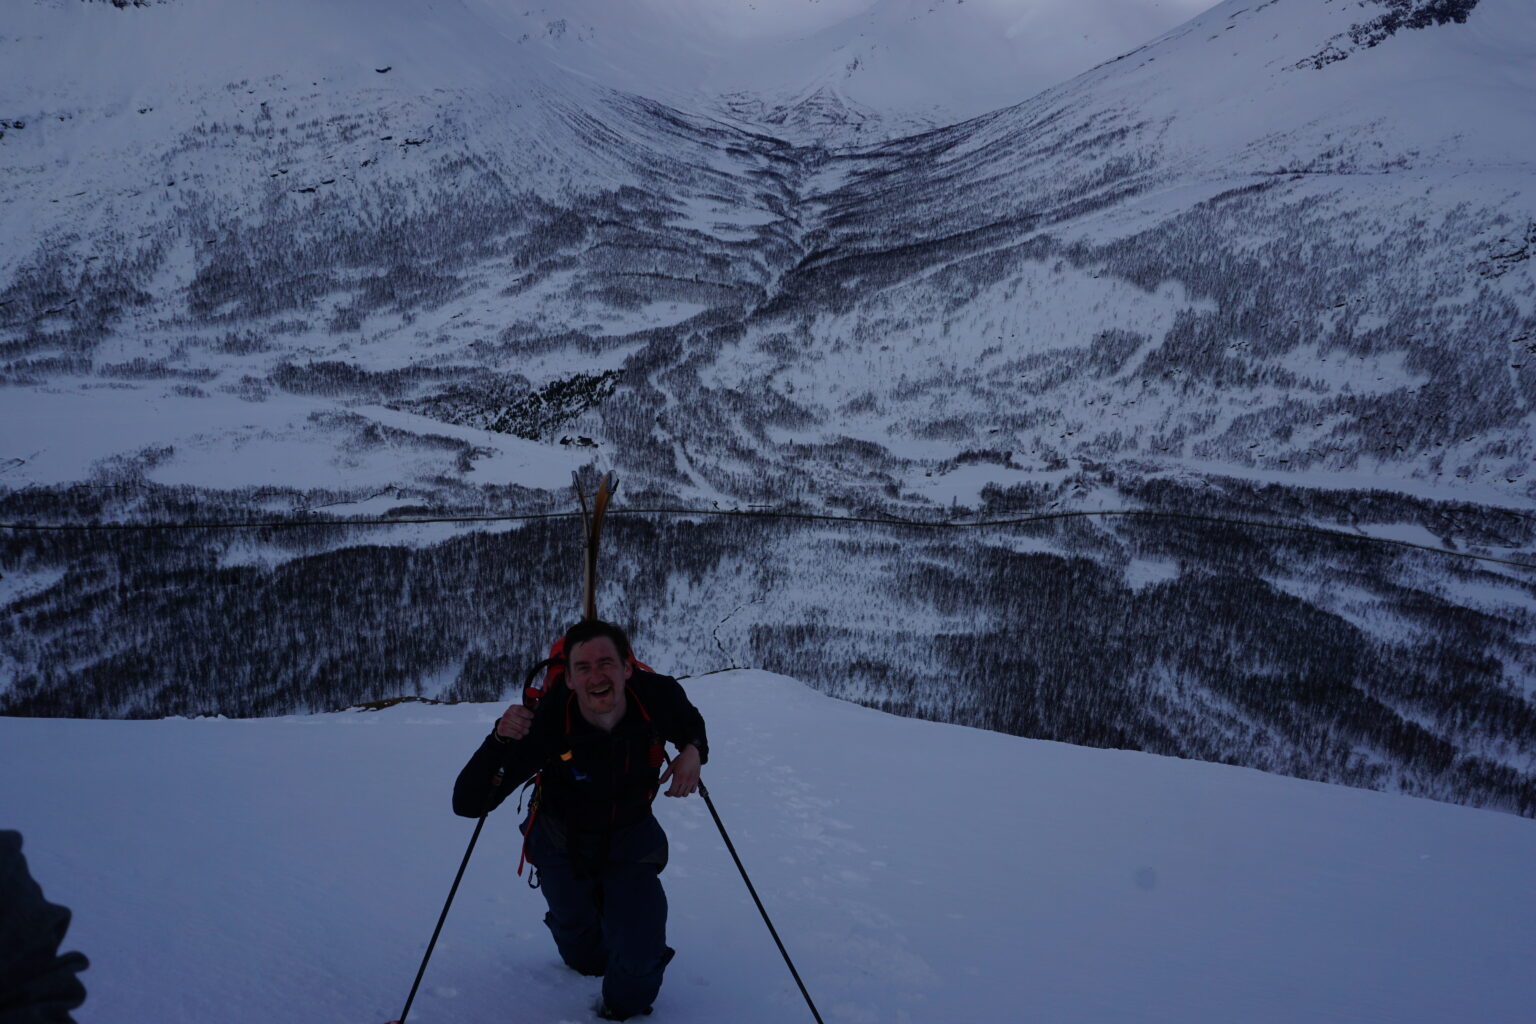 A brutal hike in the Tamokdalen backcountry